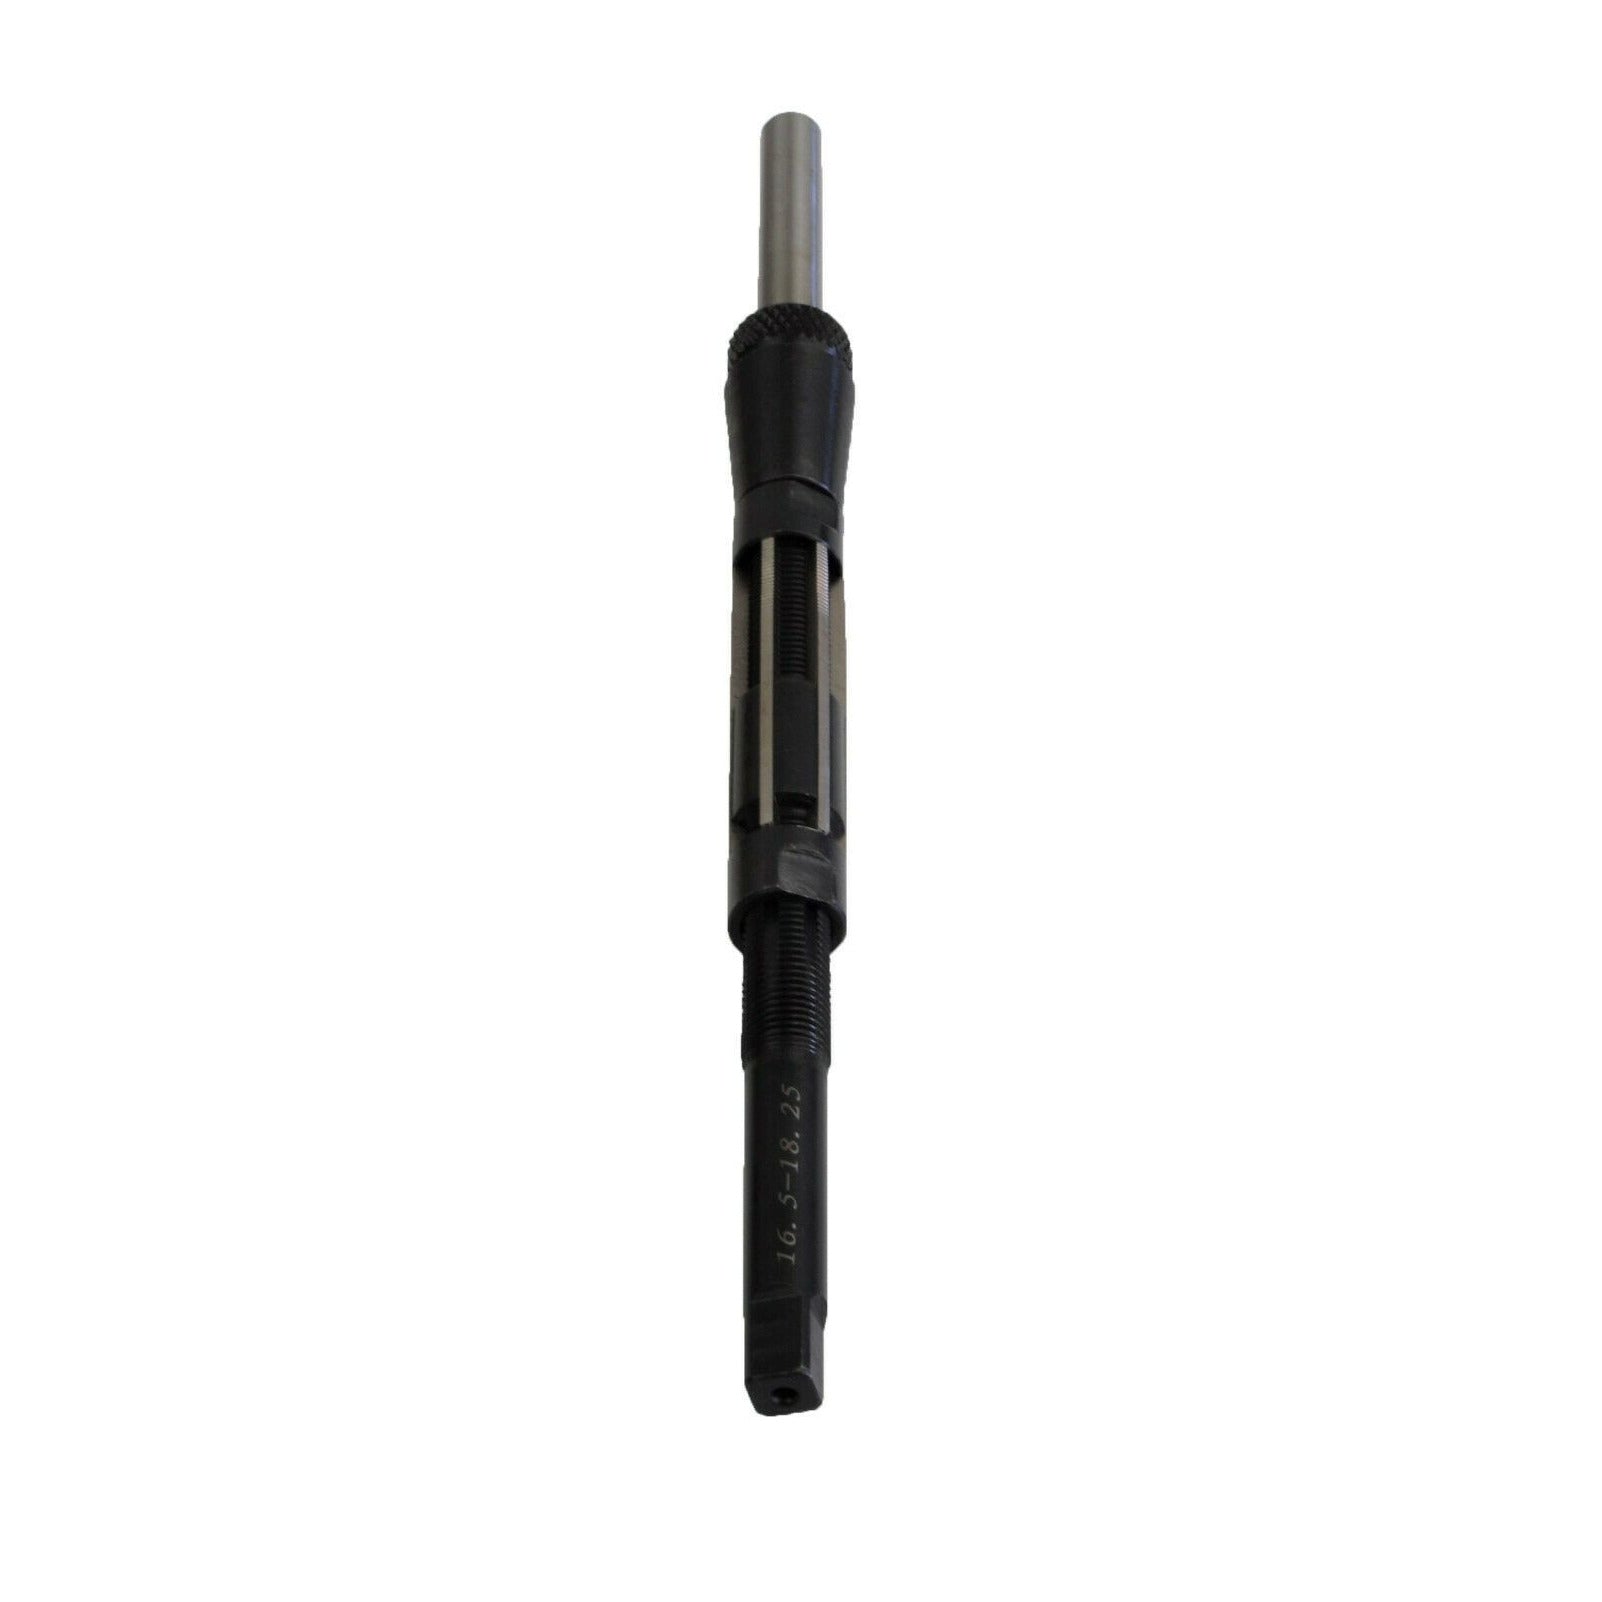 16.5 - 18.25mm Adjustable Hand Reamer with Guide